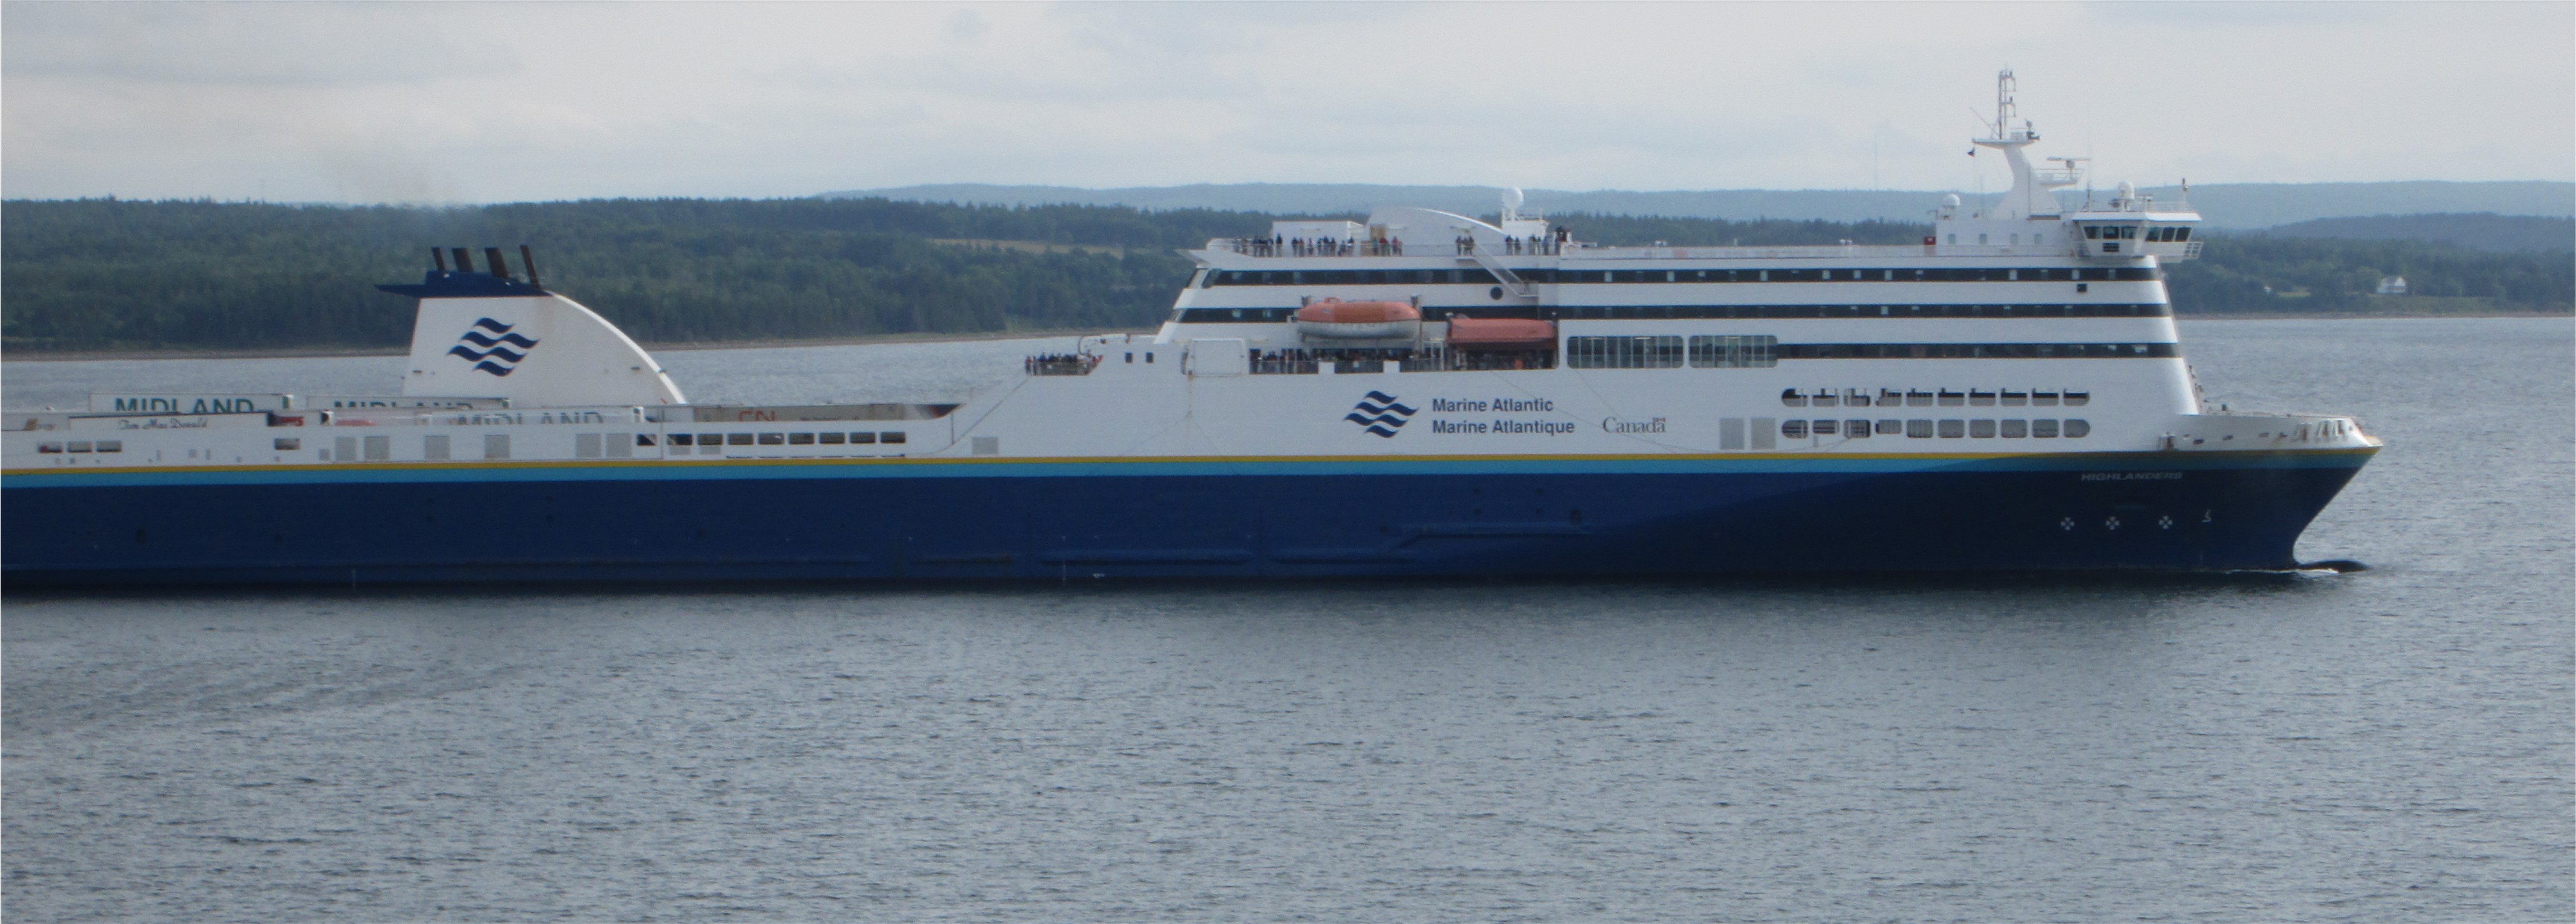 The Marine Atlantic Blue Puttees, a passenger and vehicle ferry, sails under an overcast sky